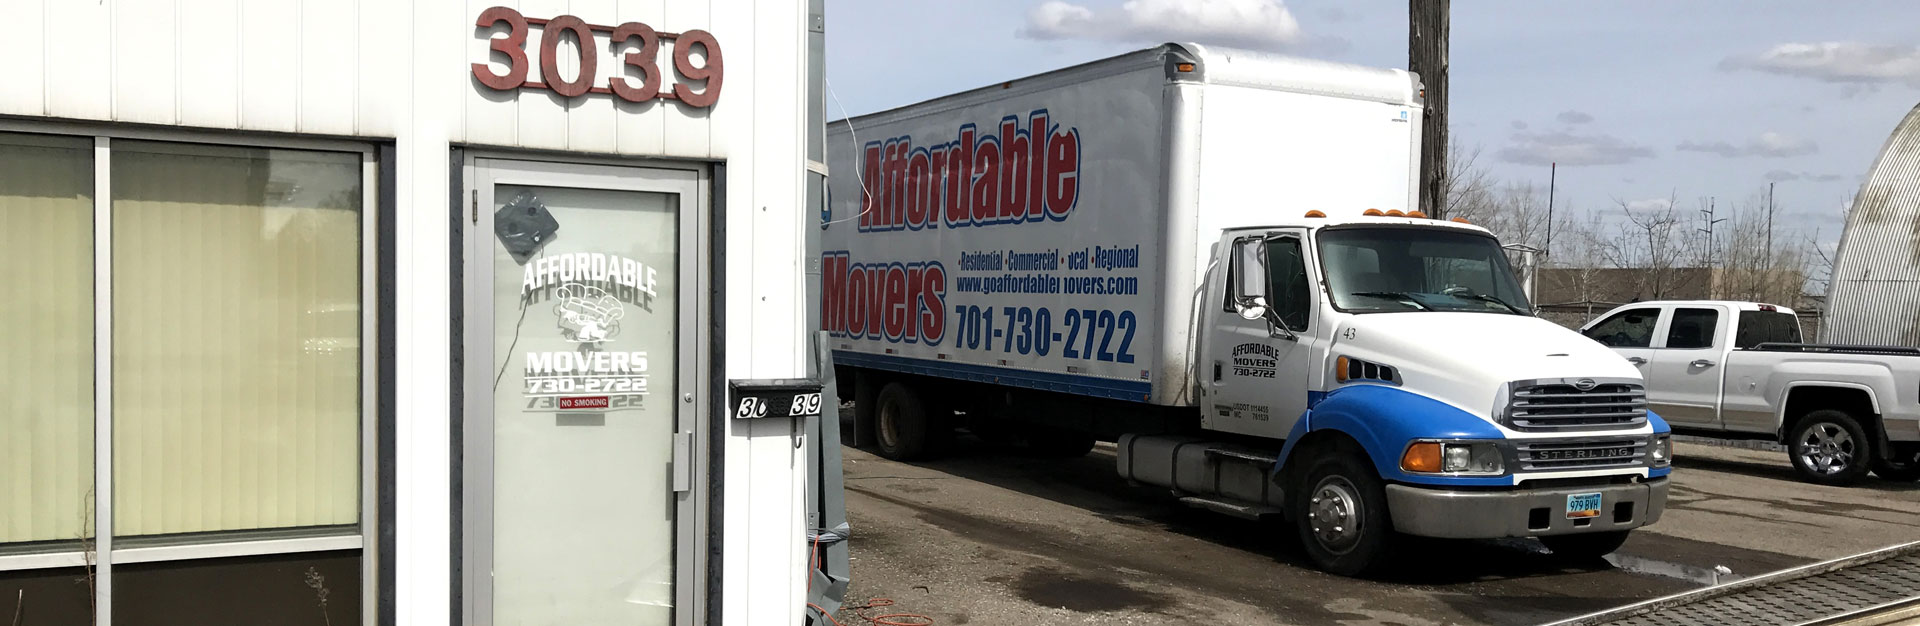 Affordable Movers - About Us